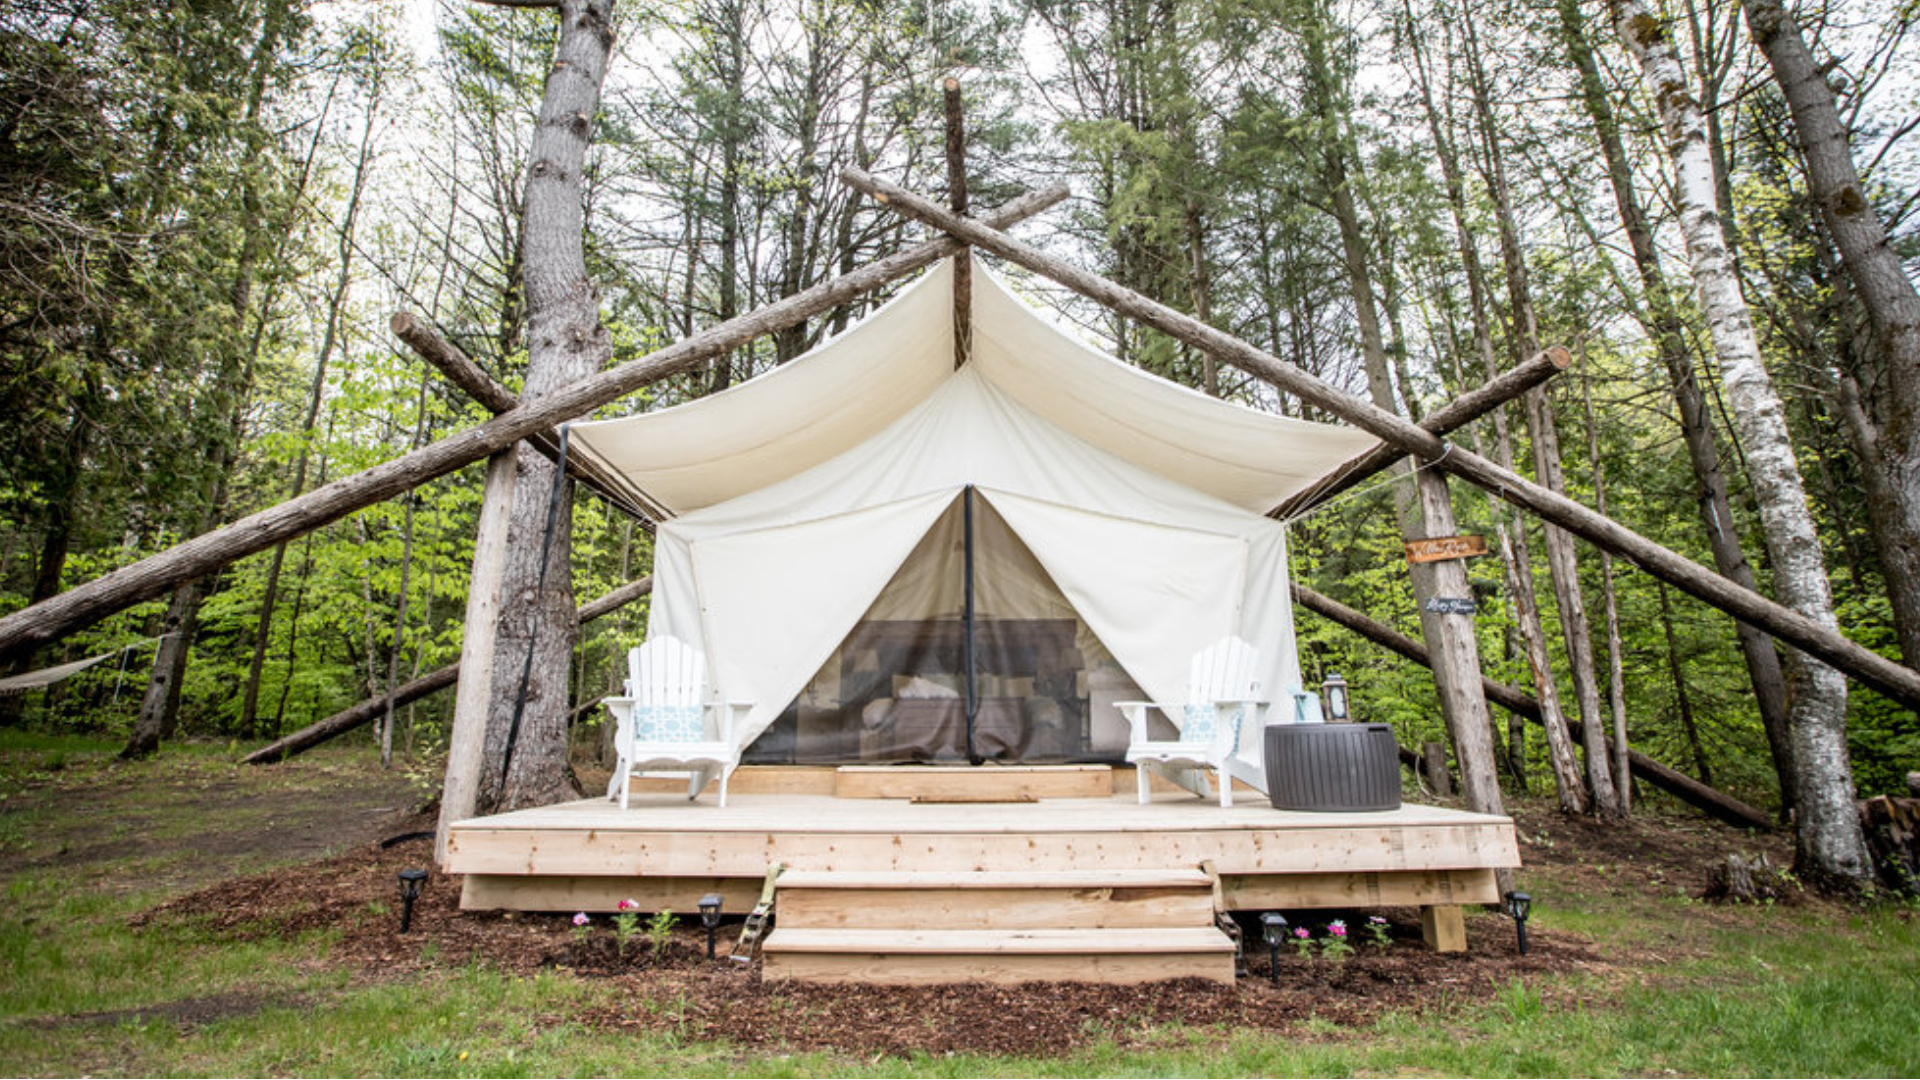 This luxury glamping site is just an hour away from Toronto